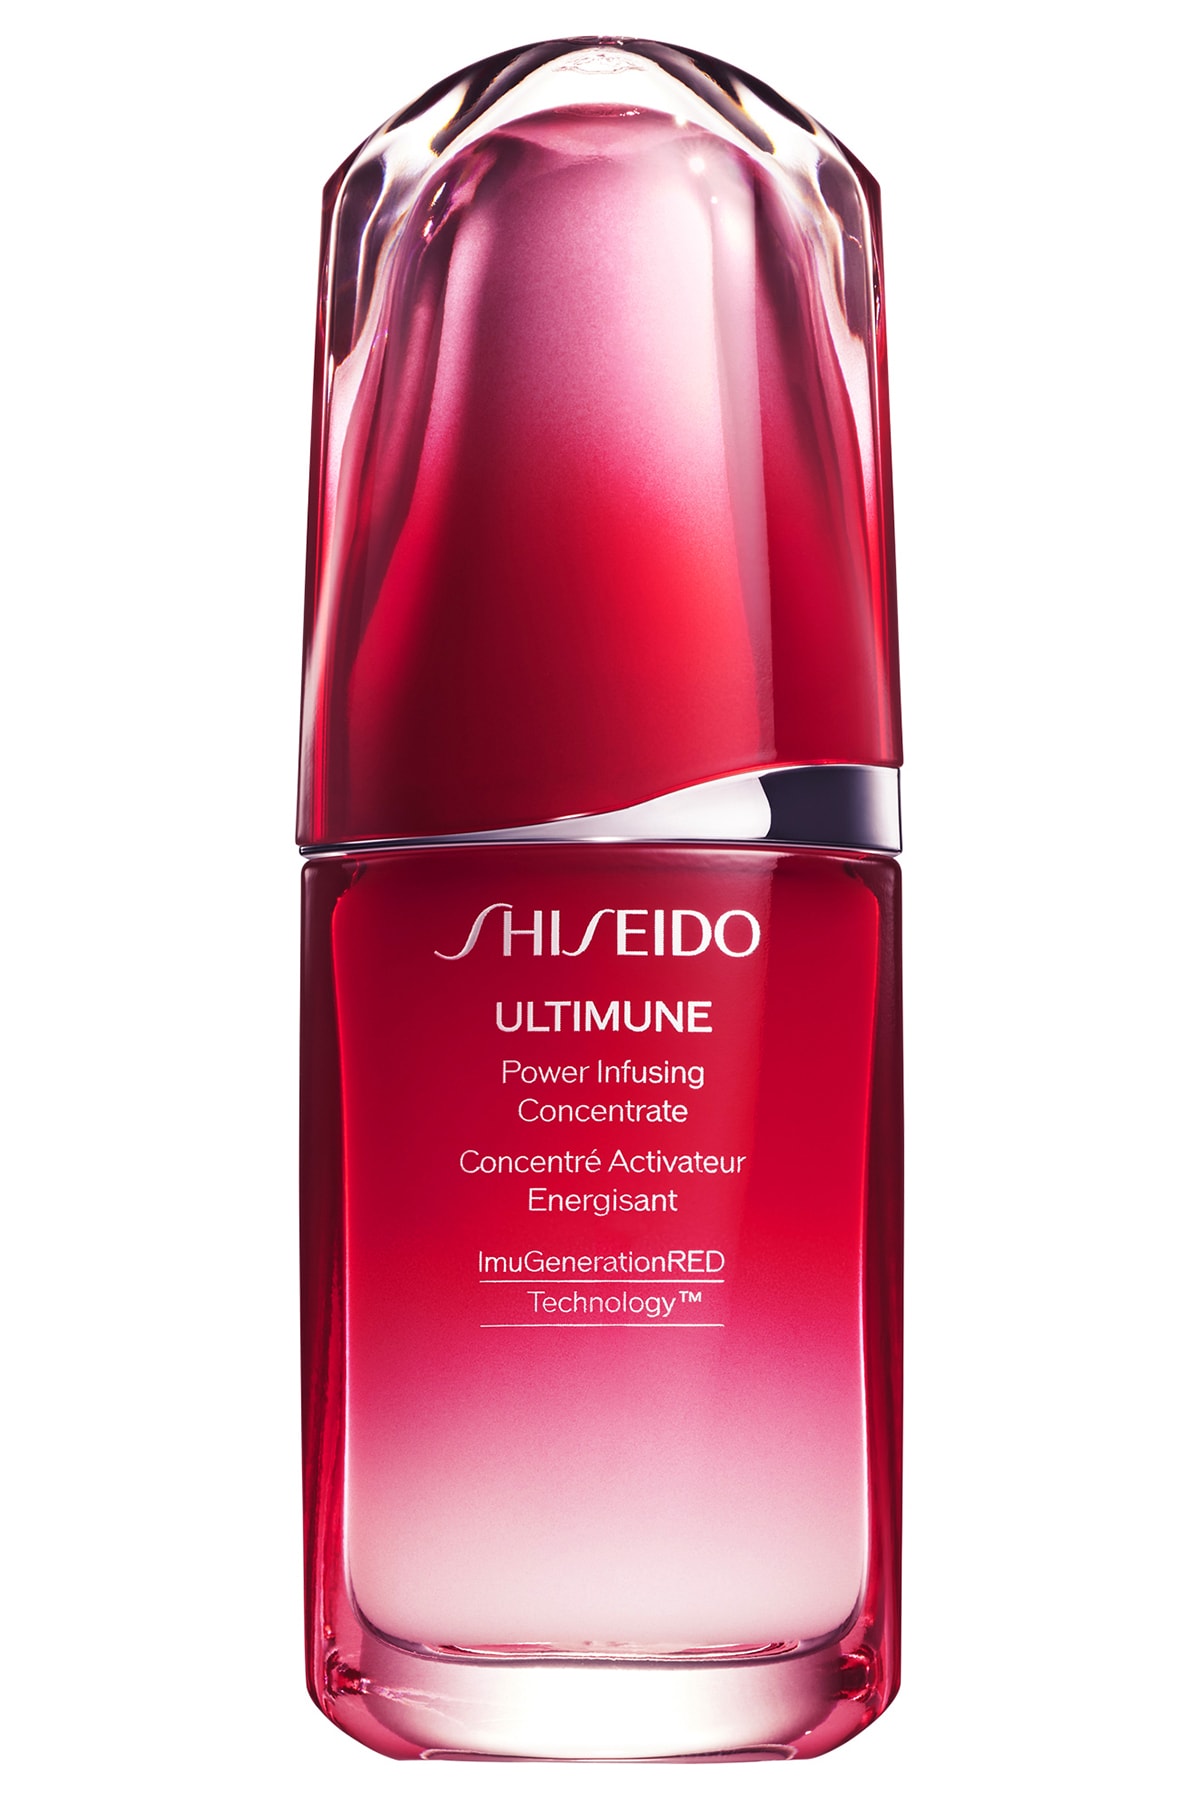 Shiseido Ultimune Power Infusing Concentrate 3.0 50ml